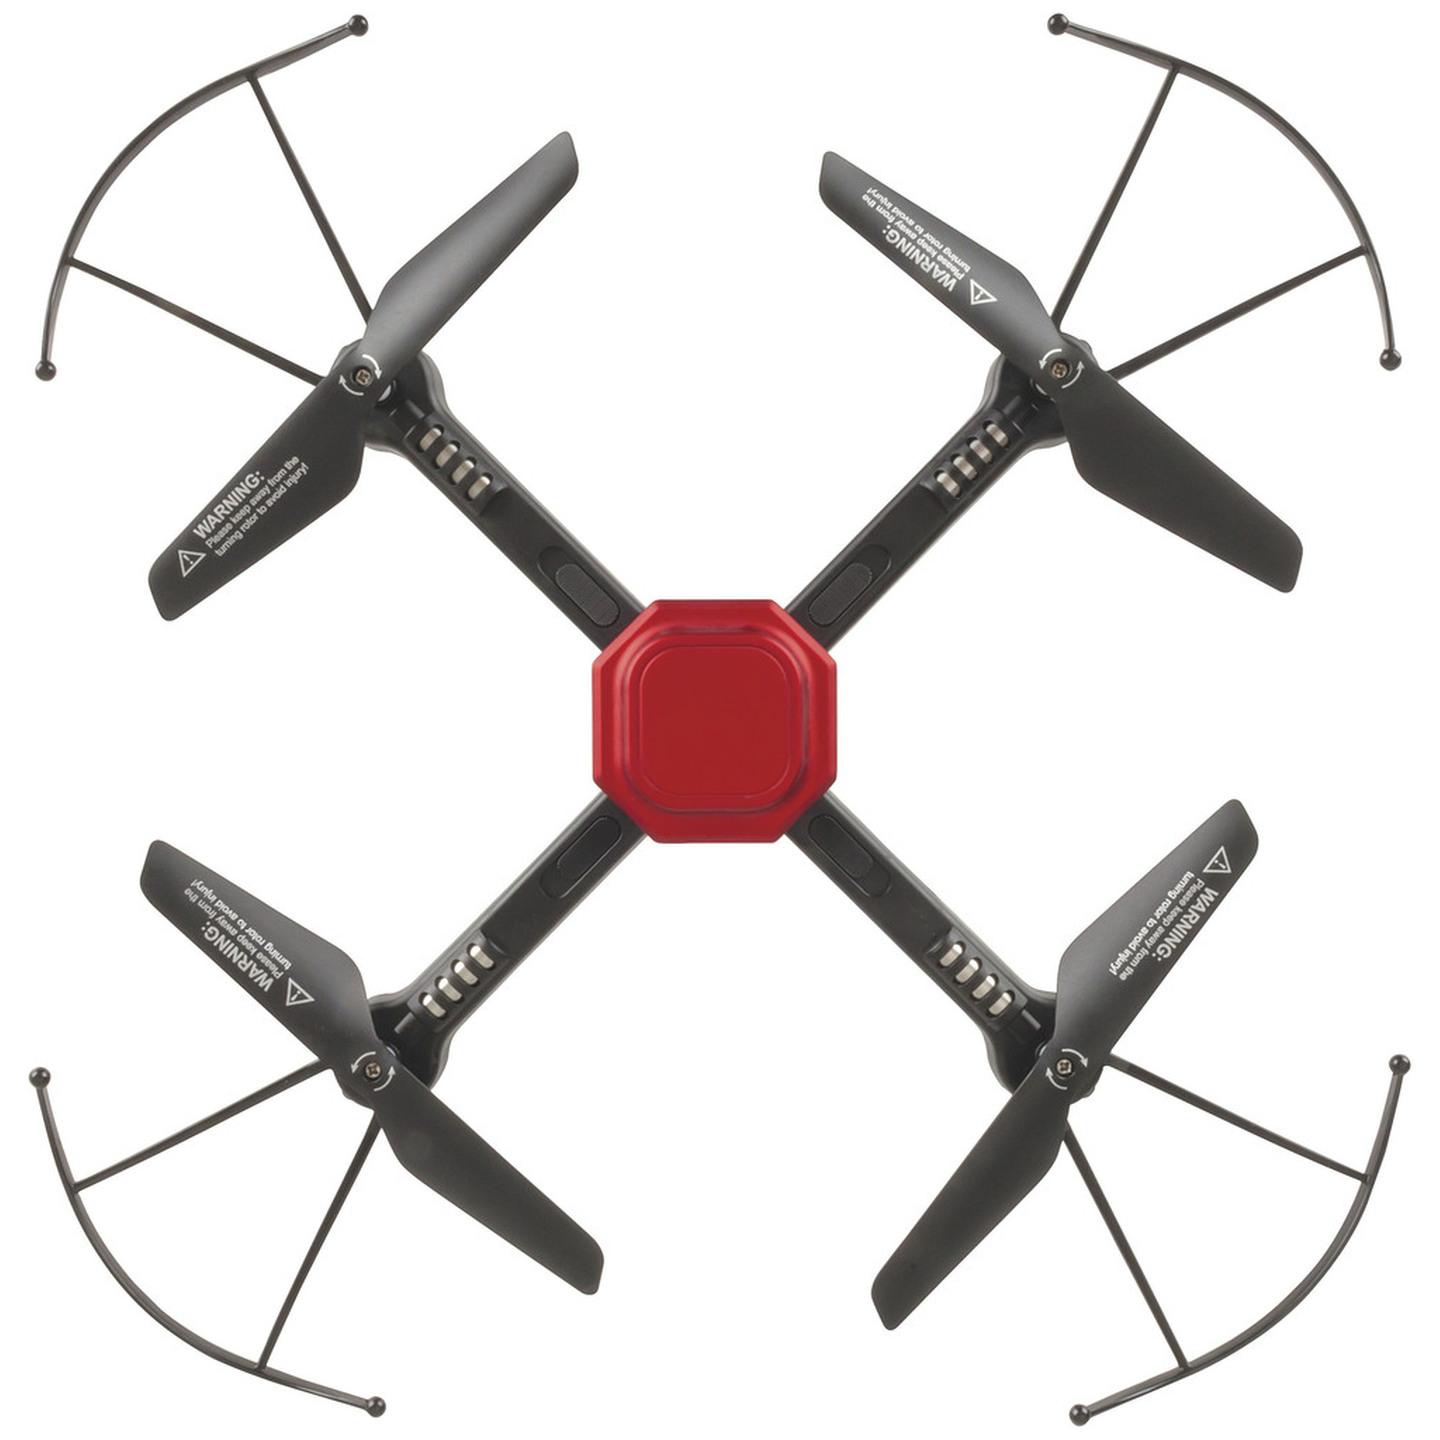 Folding Quadcopter 2.4GHz with Video & WiFi